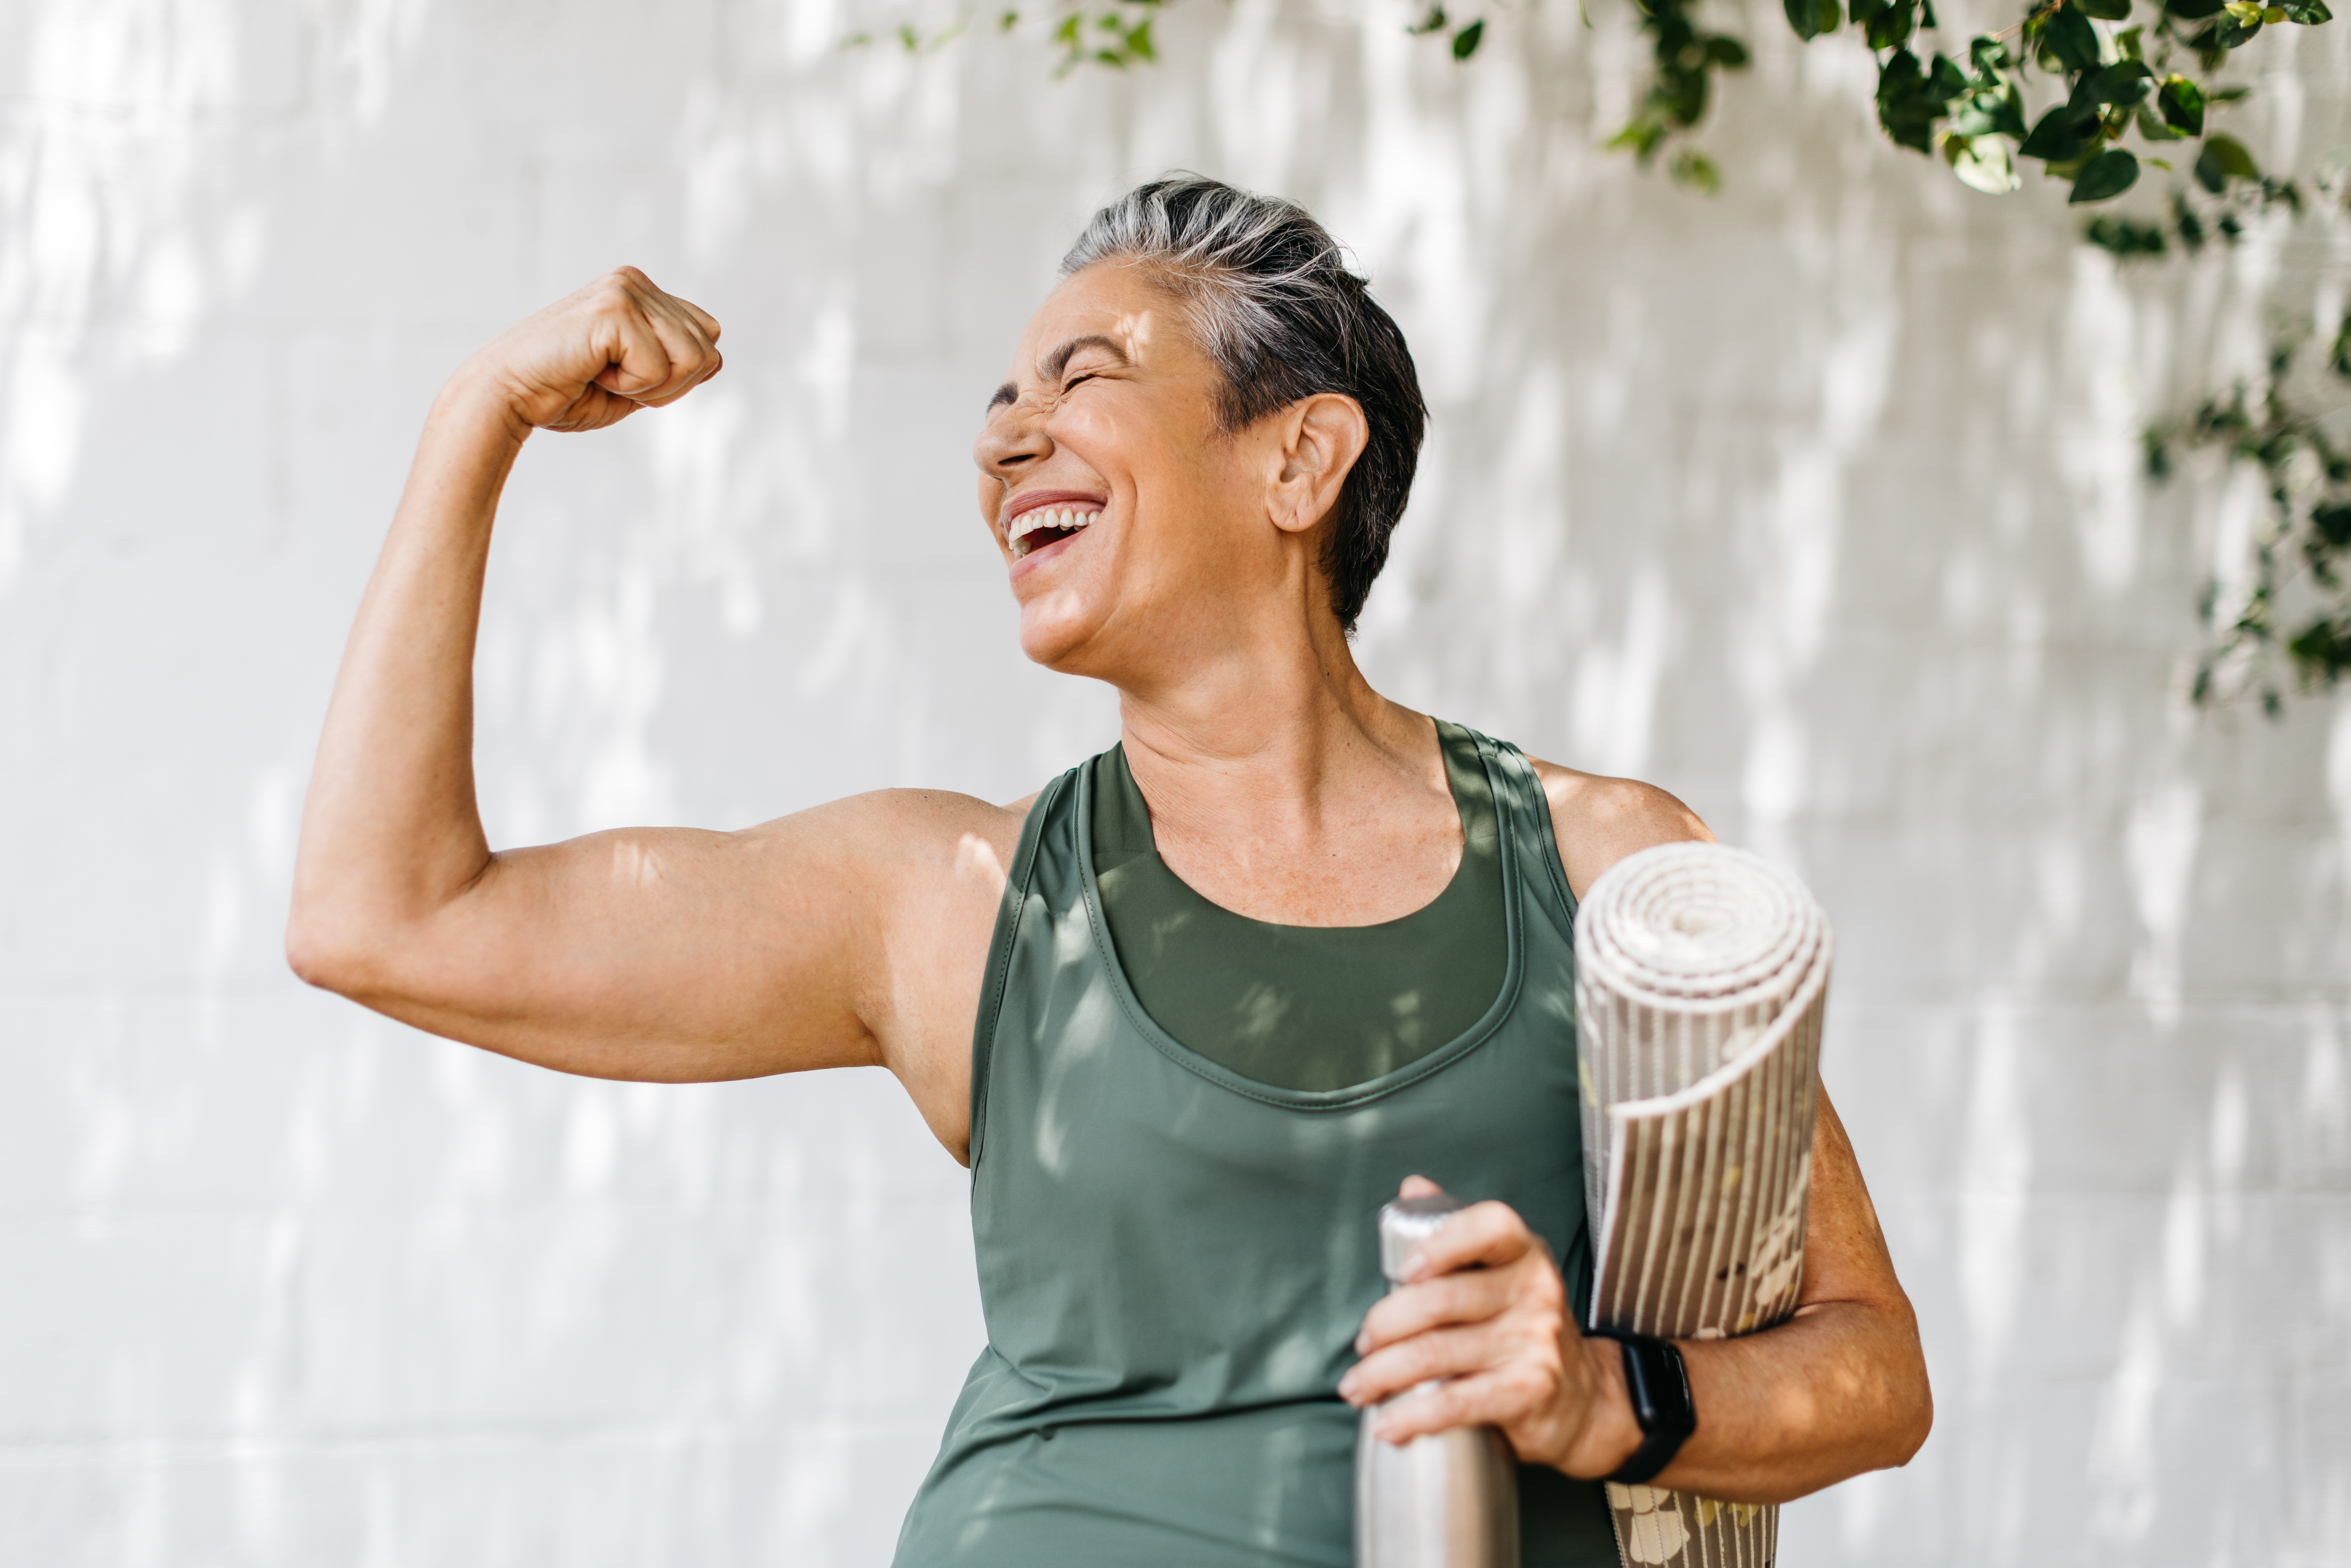 Woman celebrates her fitness achievements by flaunting her bicep outdoors